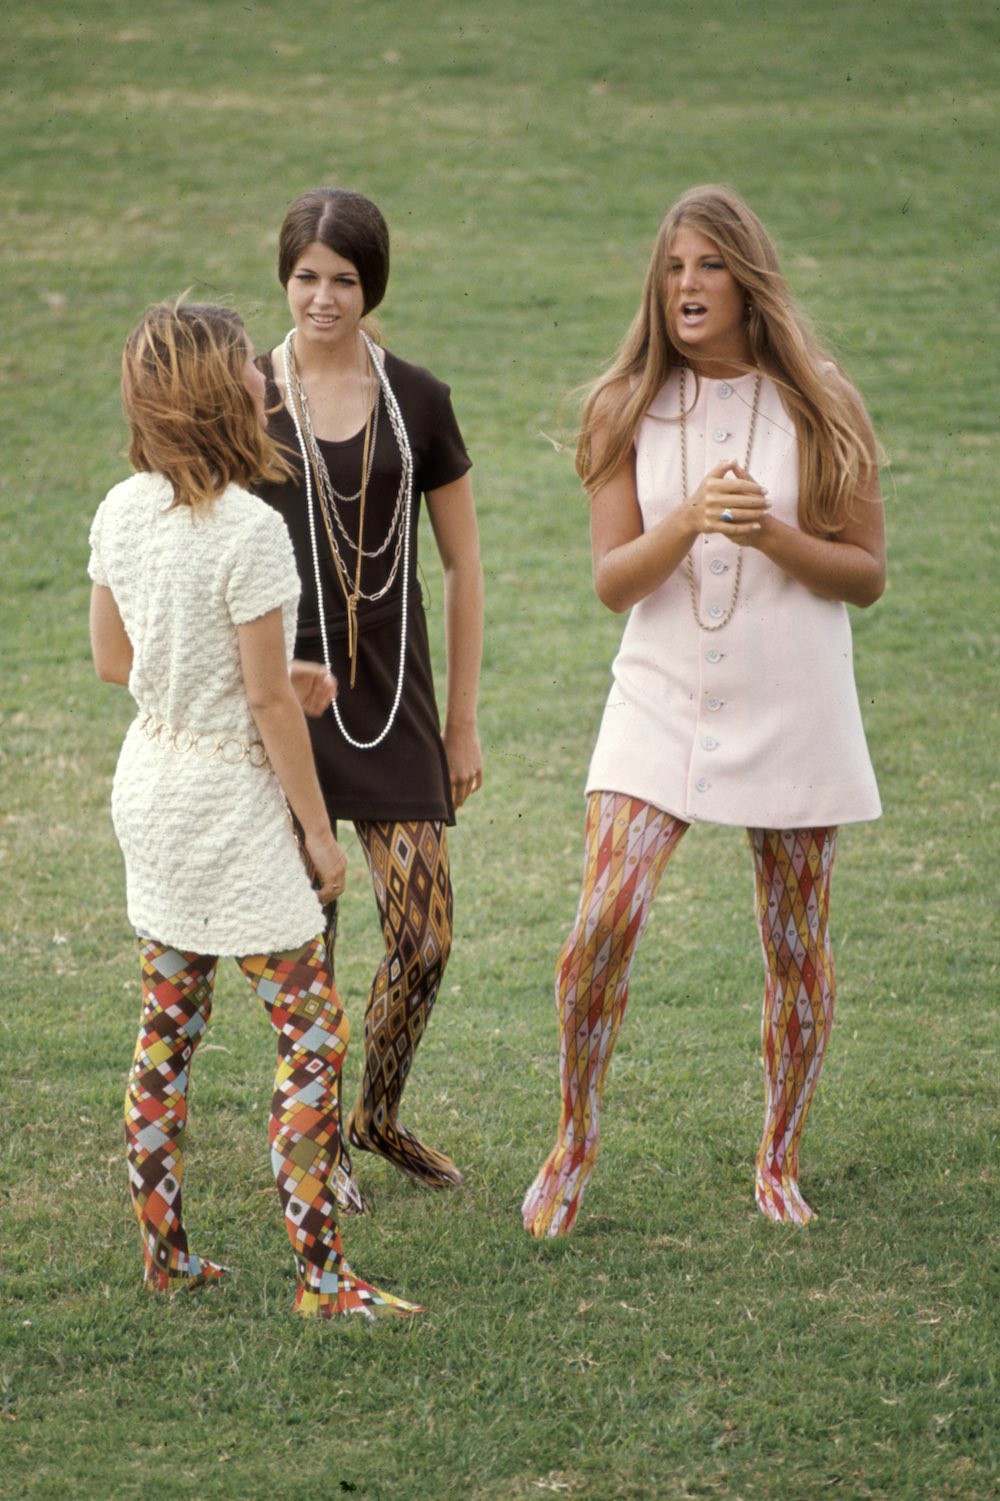 1969 hippies wearing fashionable tights.